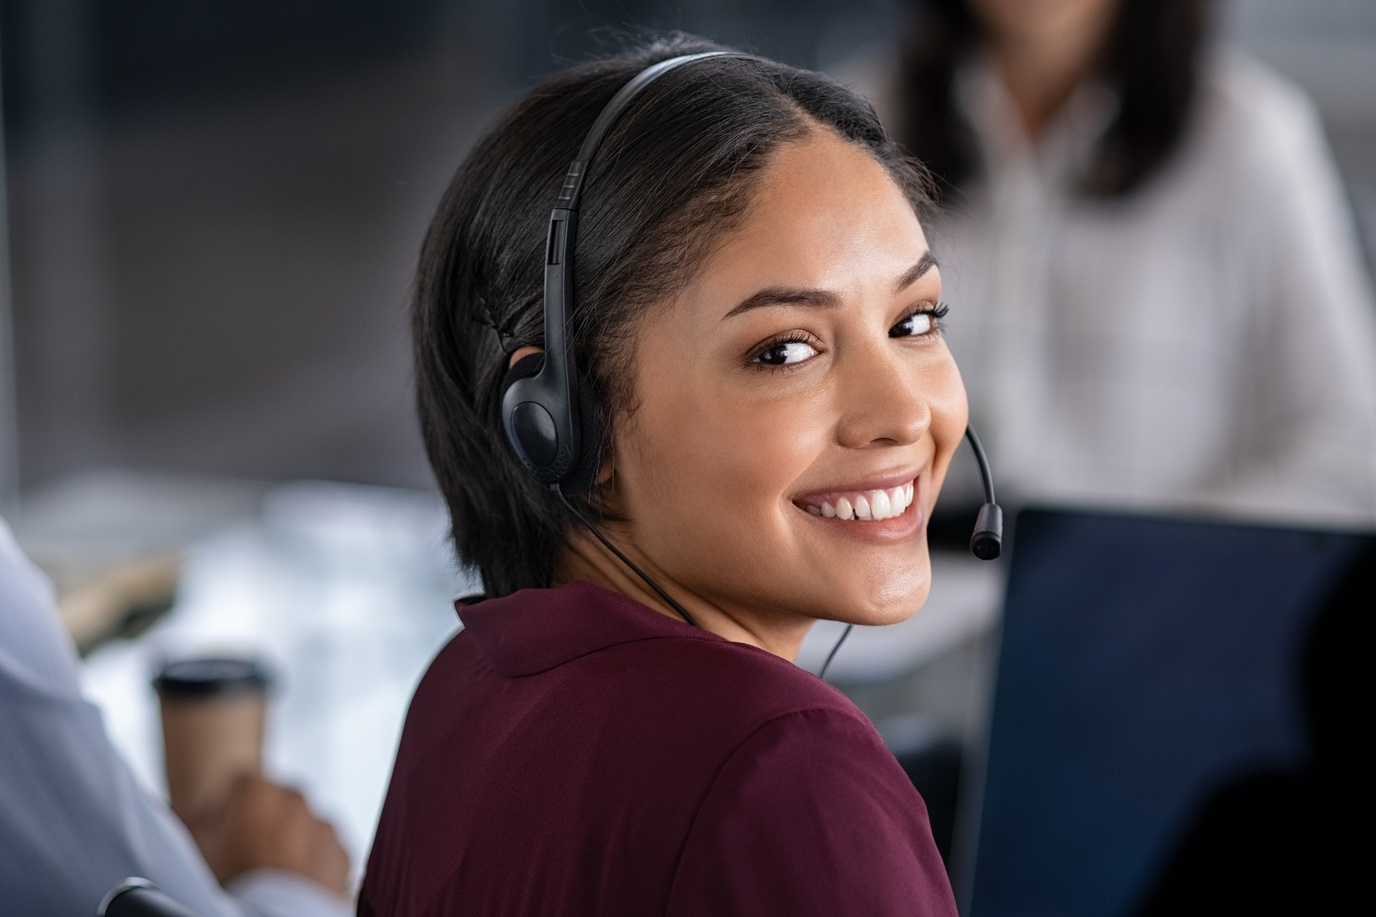 Woman Wearing Headset in Call Center